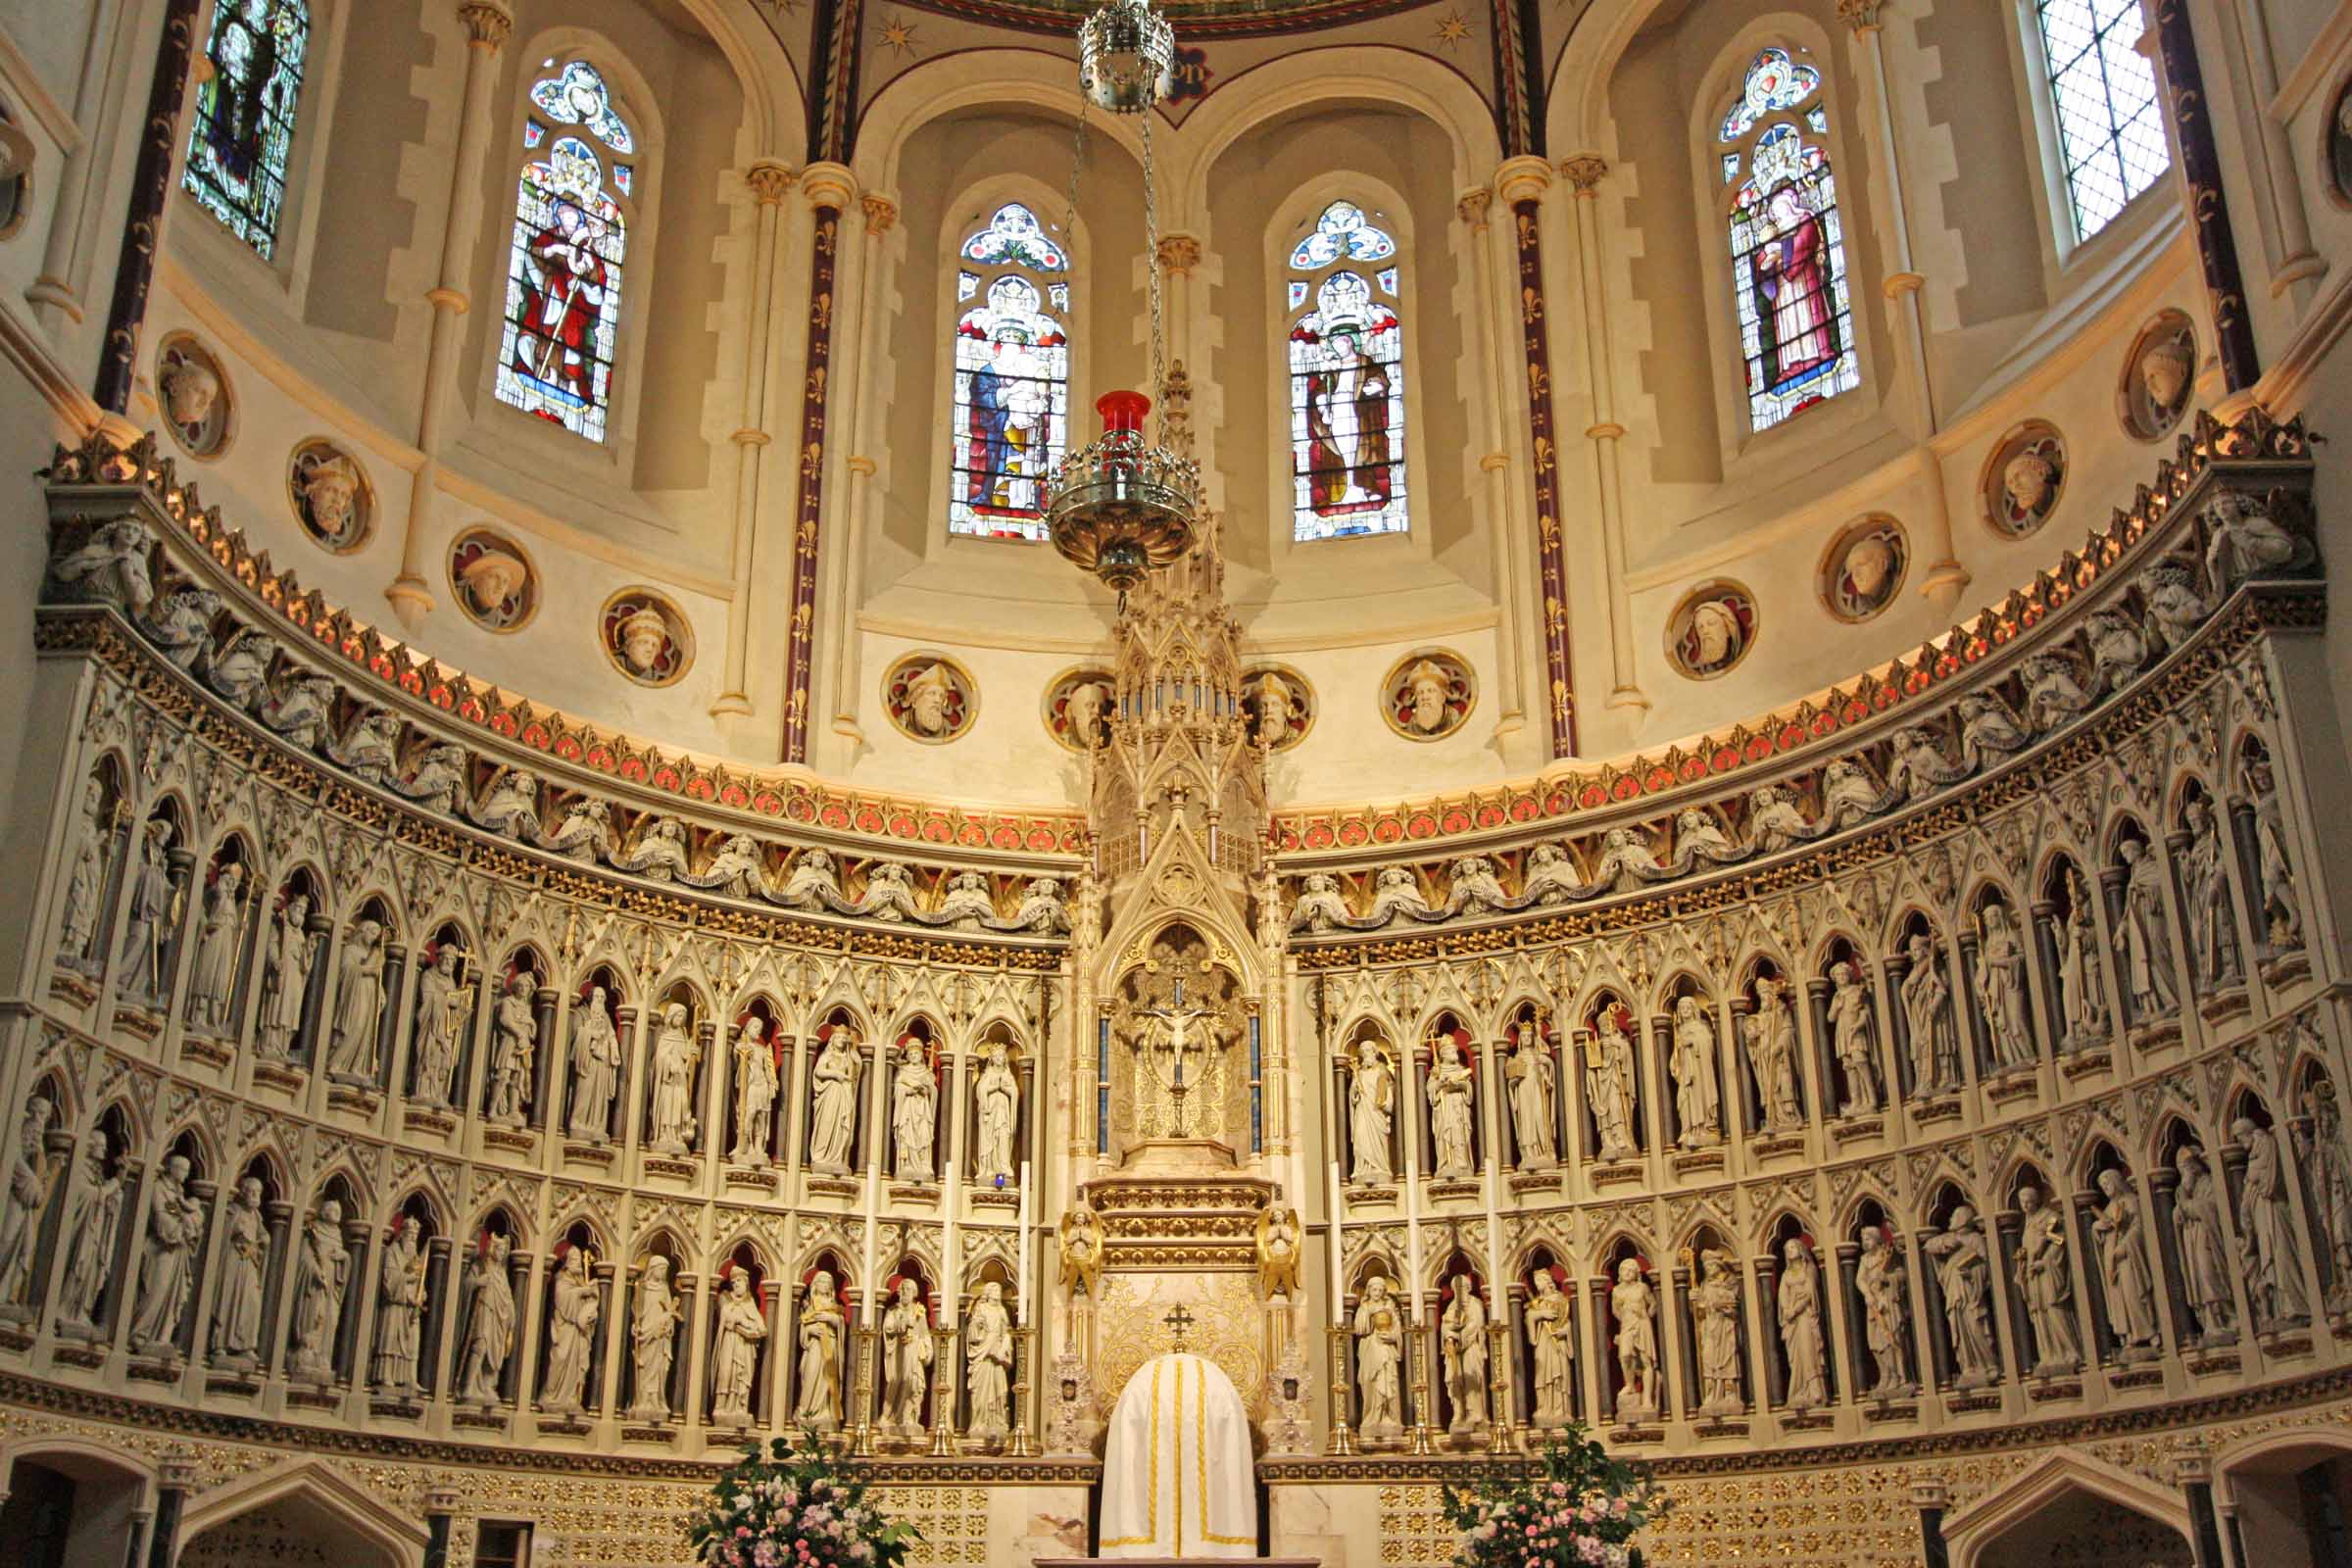 The newly-restored reredos in St Aloysius' church in Oxford expresses the Church's faith in the communion of saints. CC Fr Paul Lew http://bit.ly/19EP9nJ